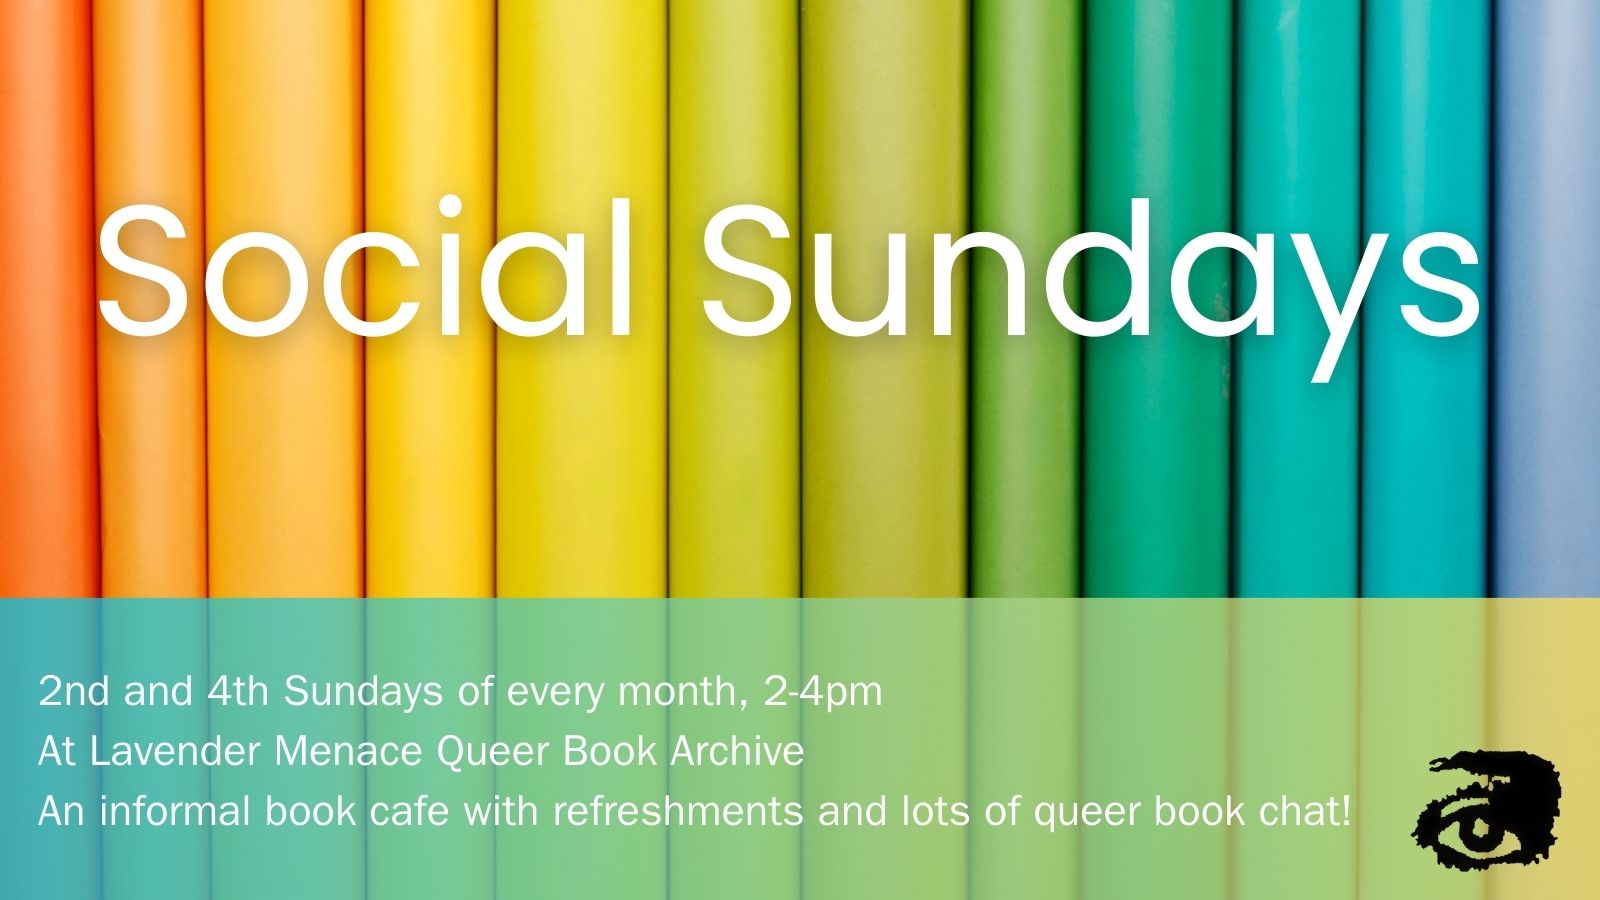 Decorative: An image of rainbow coloured books with the text Social Sunday